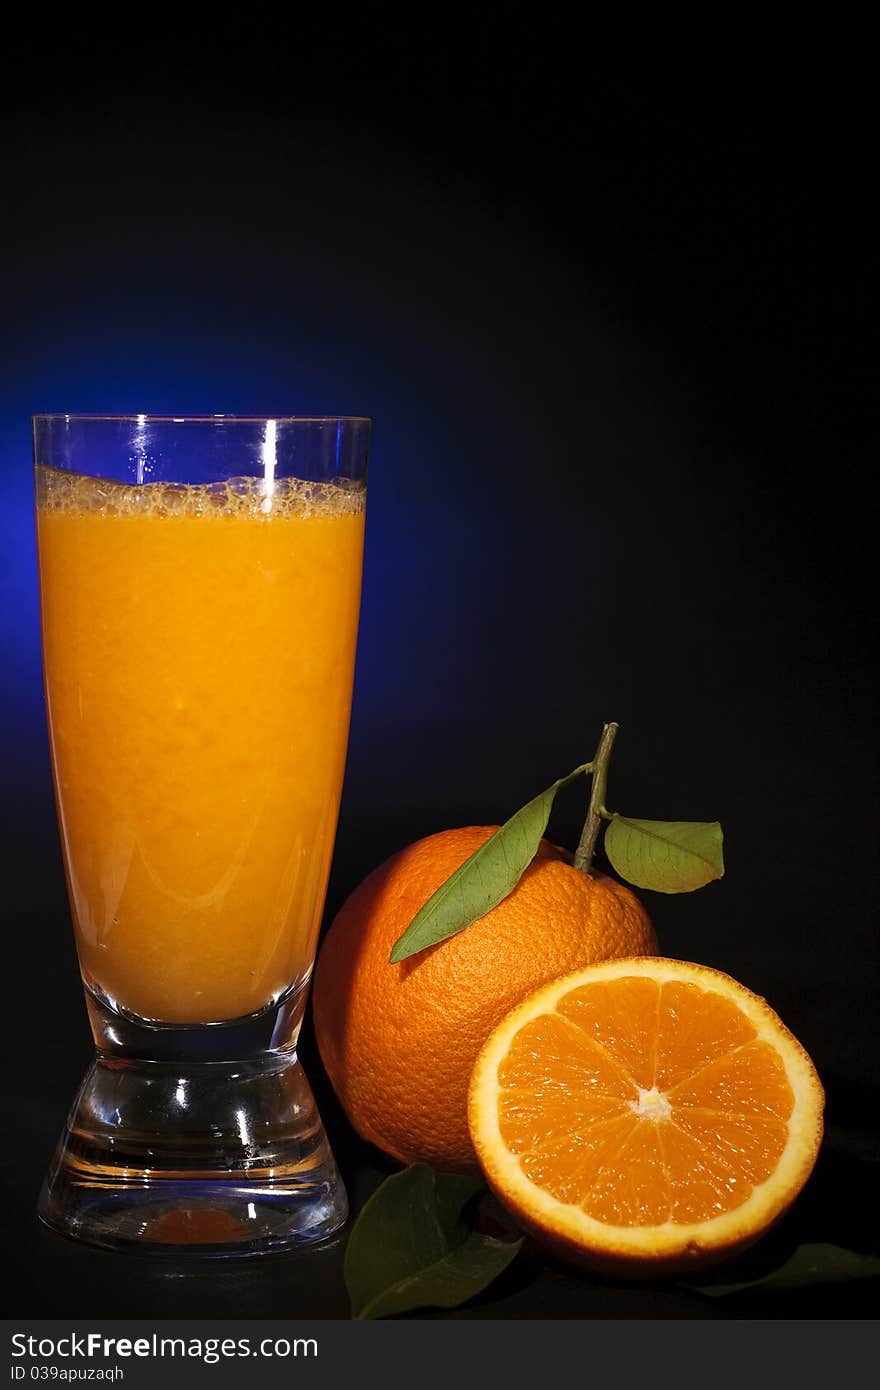 Natural orange juice in a glass and orange fruit, on black background shooting with blue gel. Natural orange juice in a glass and orange fruit, on black background shooting with blue gel